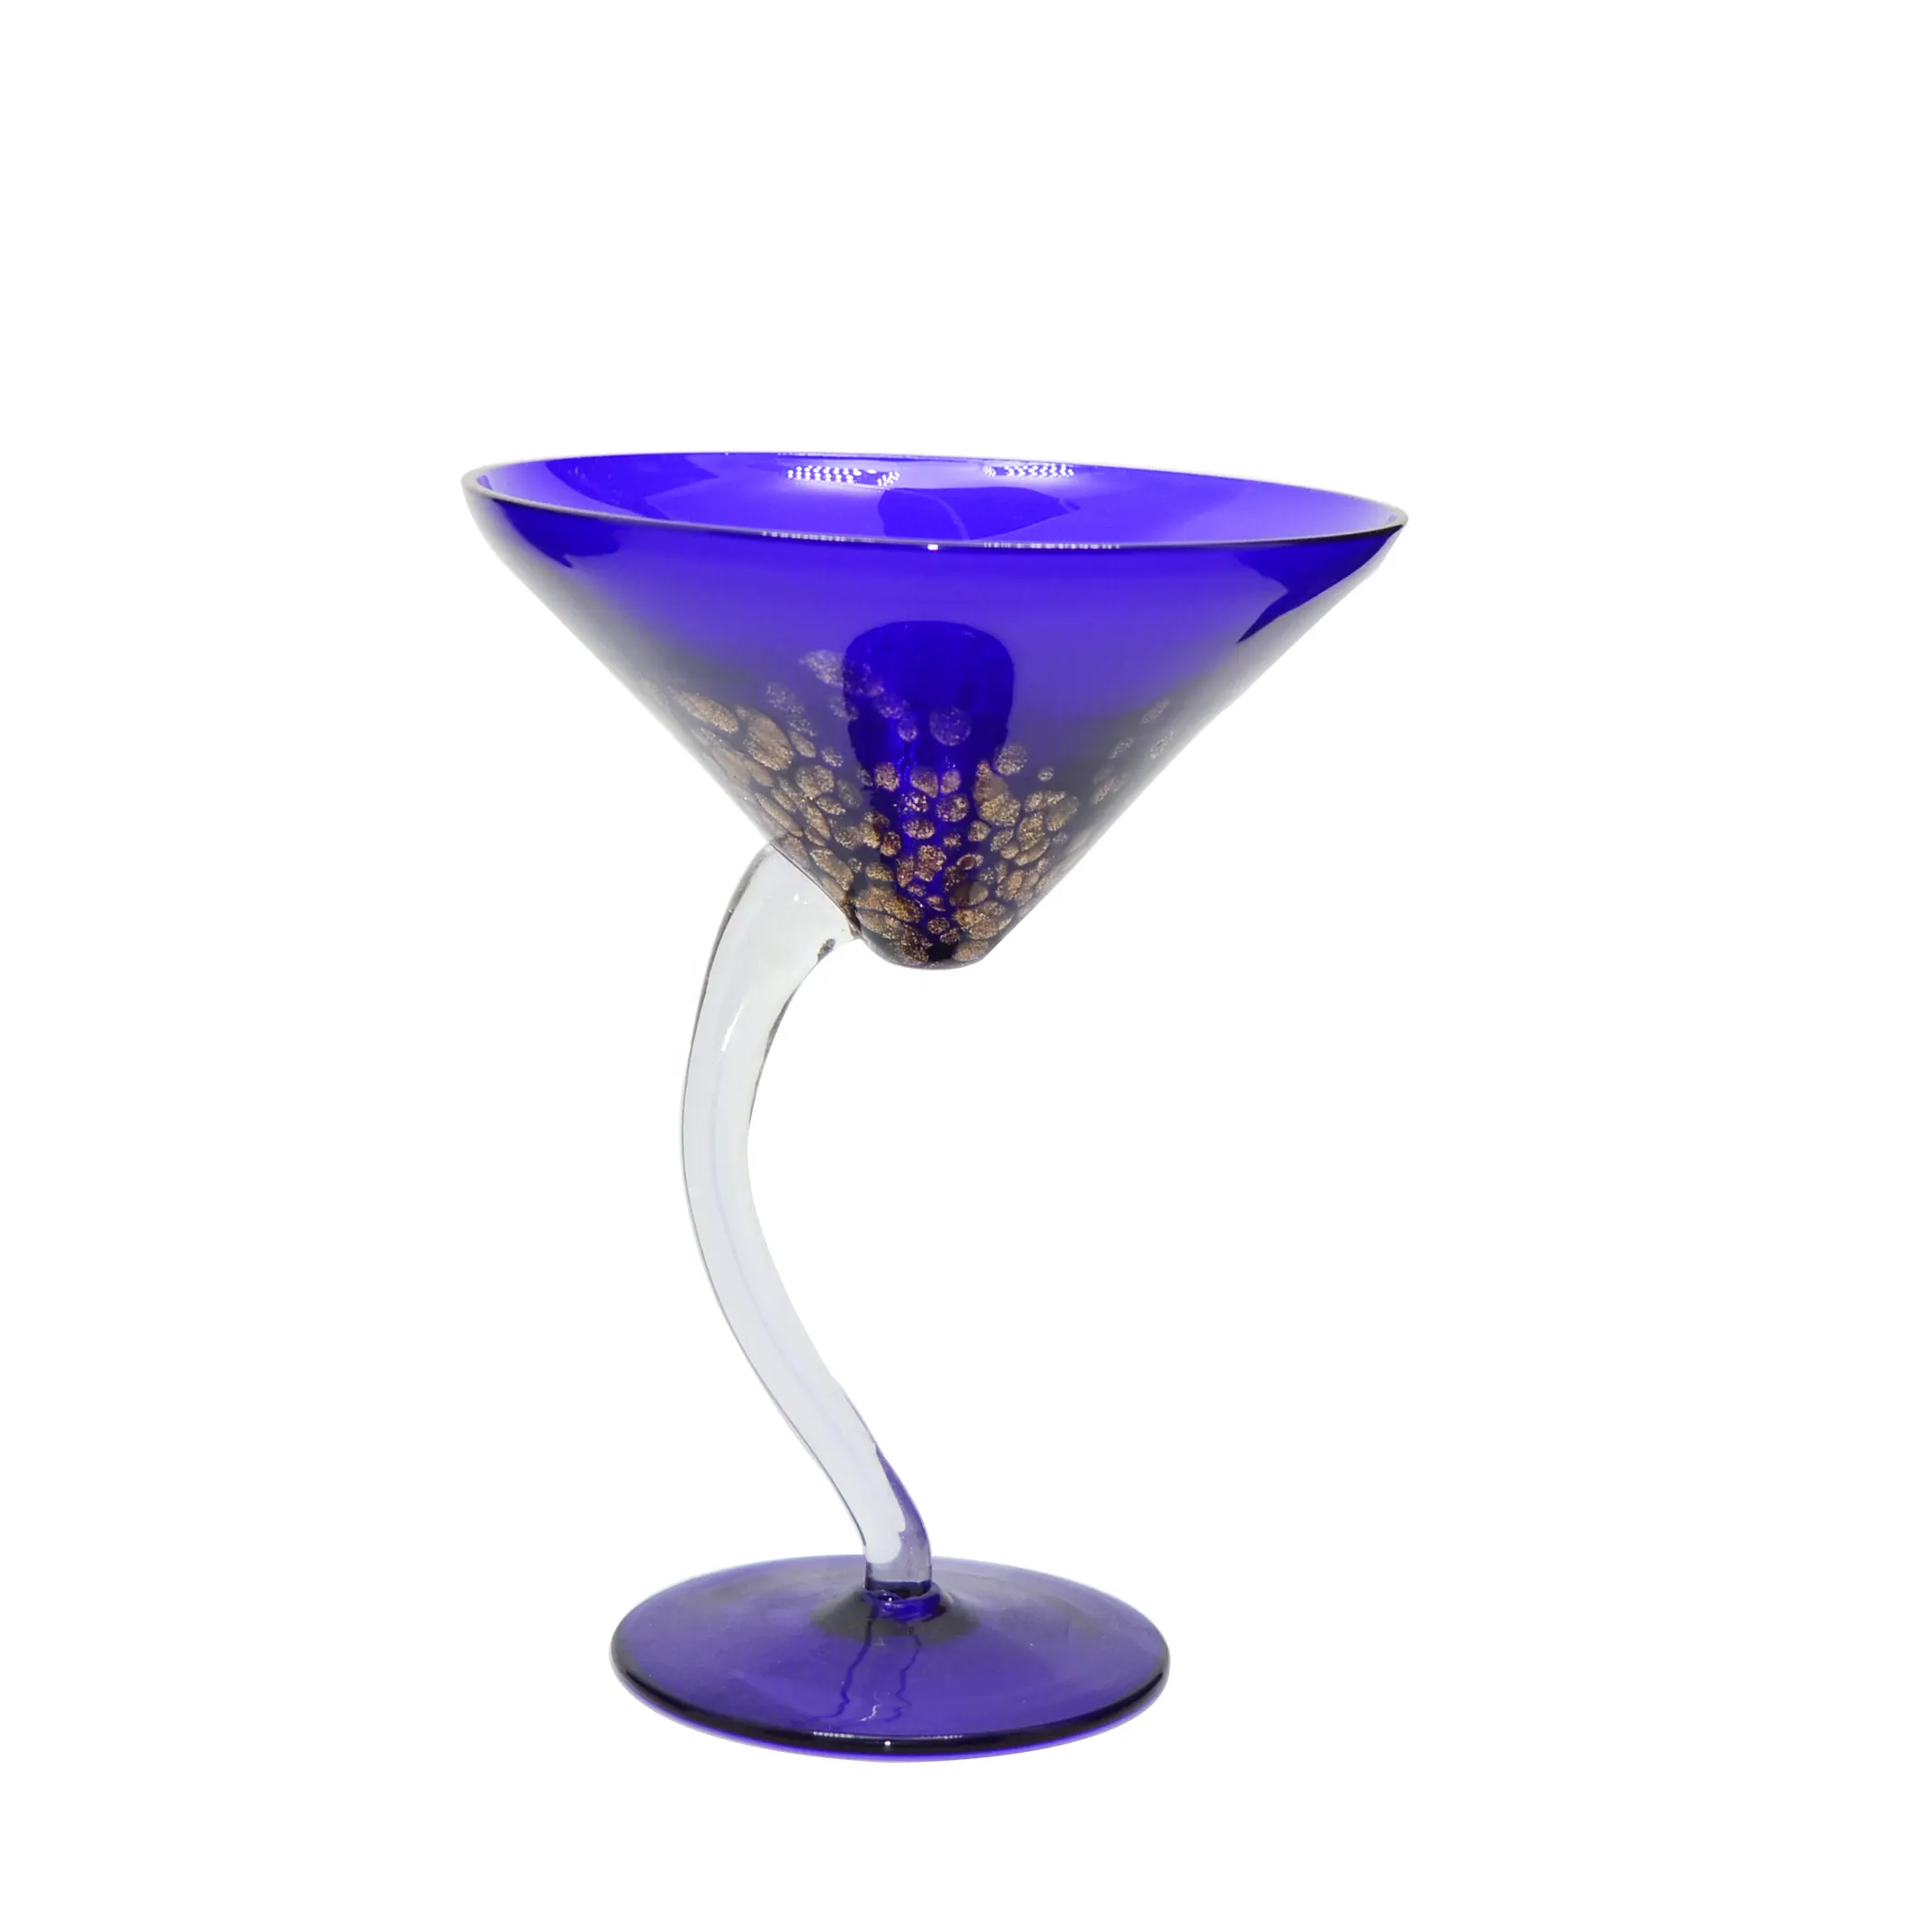 ABT New products Crooked stem Blue color martini glass cocktail glass